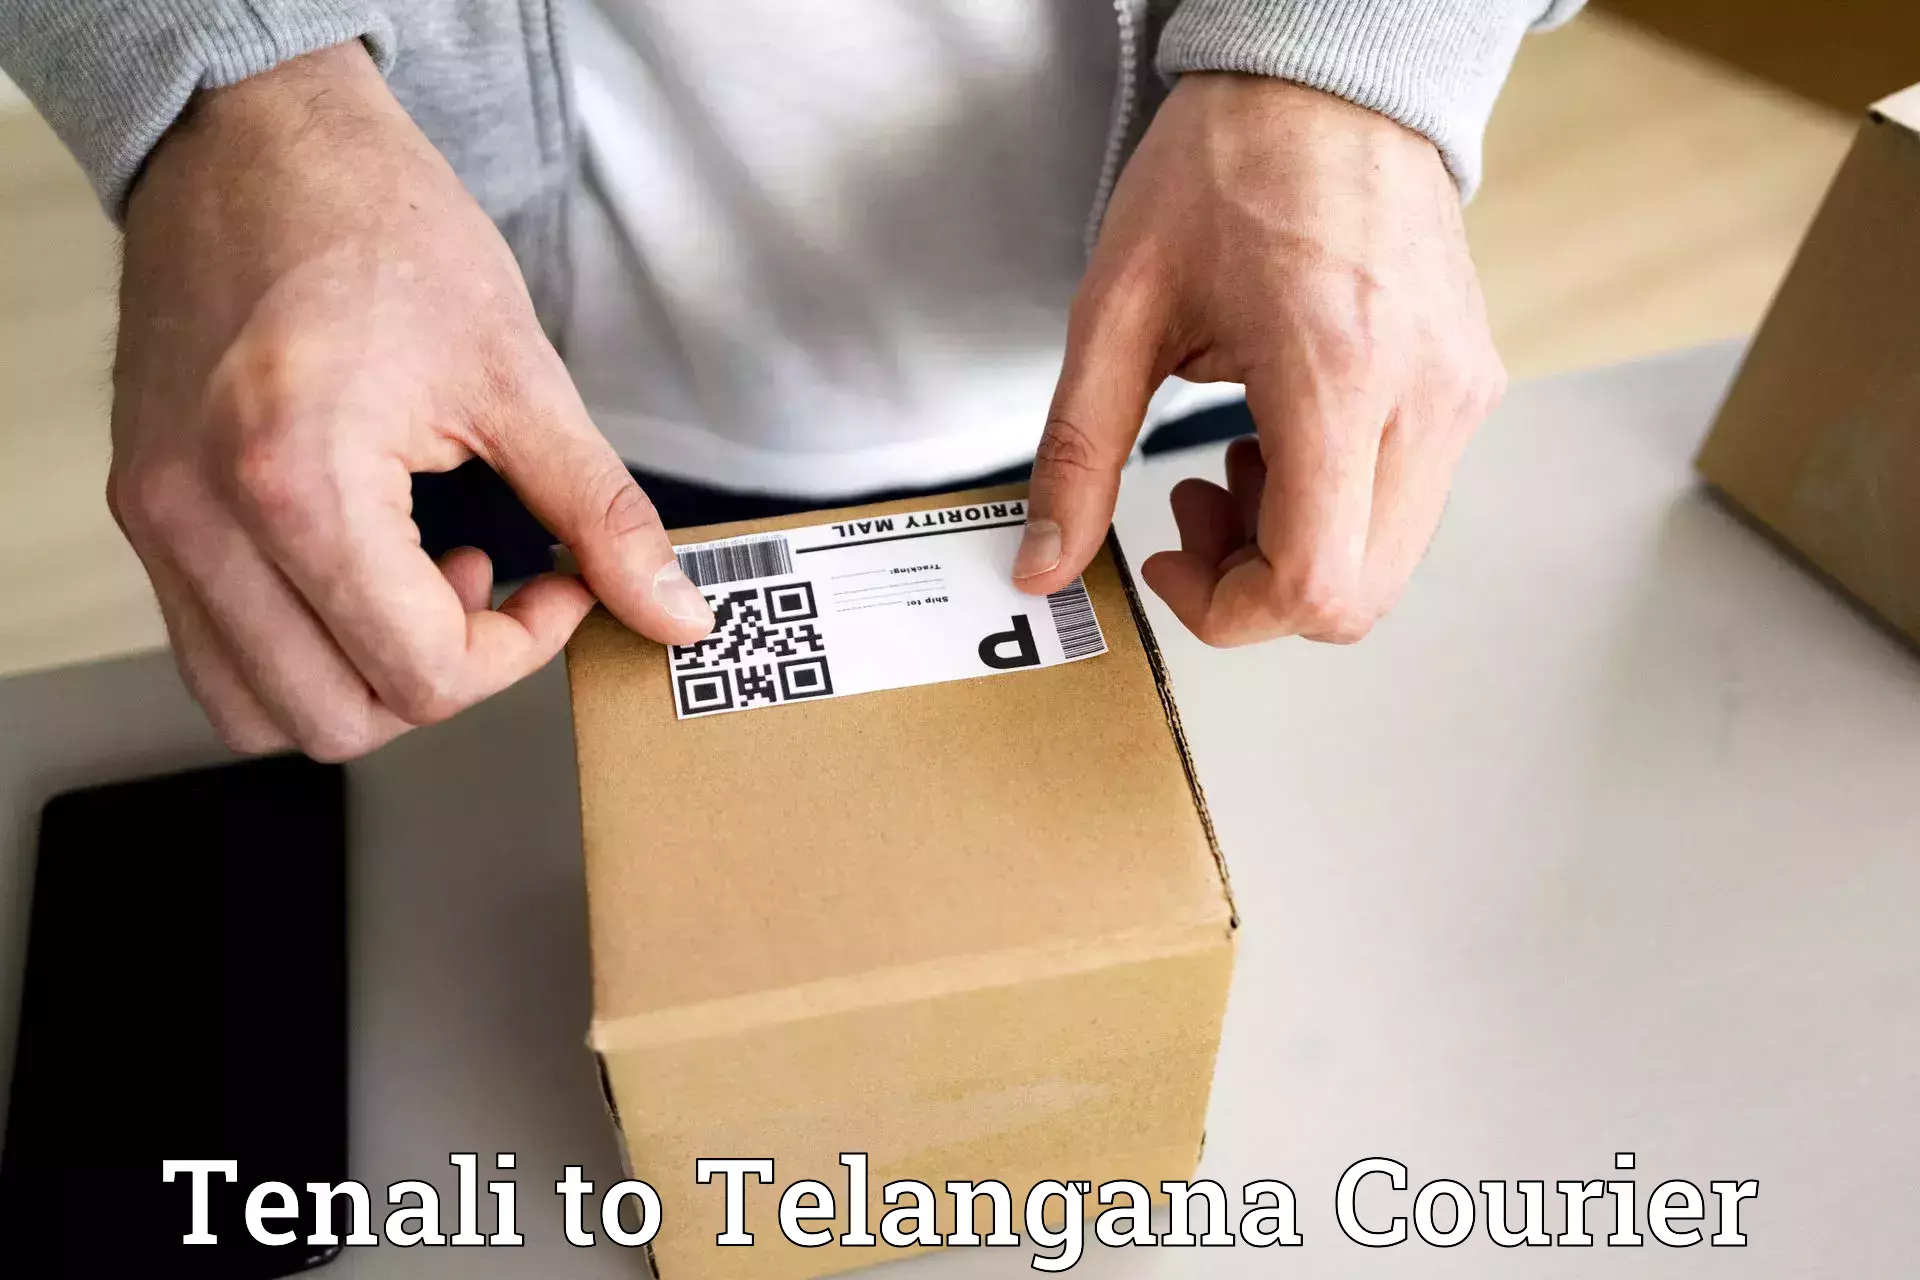 Next-day delivery options Tenali to Rudrangi